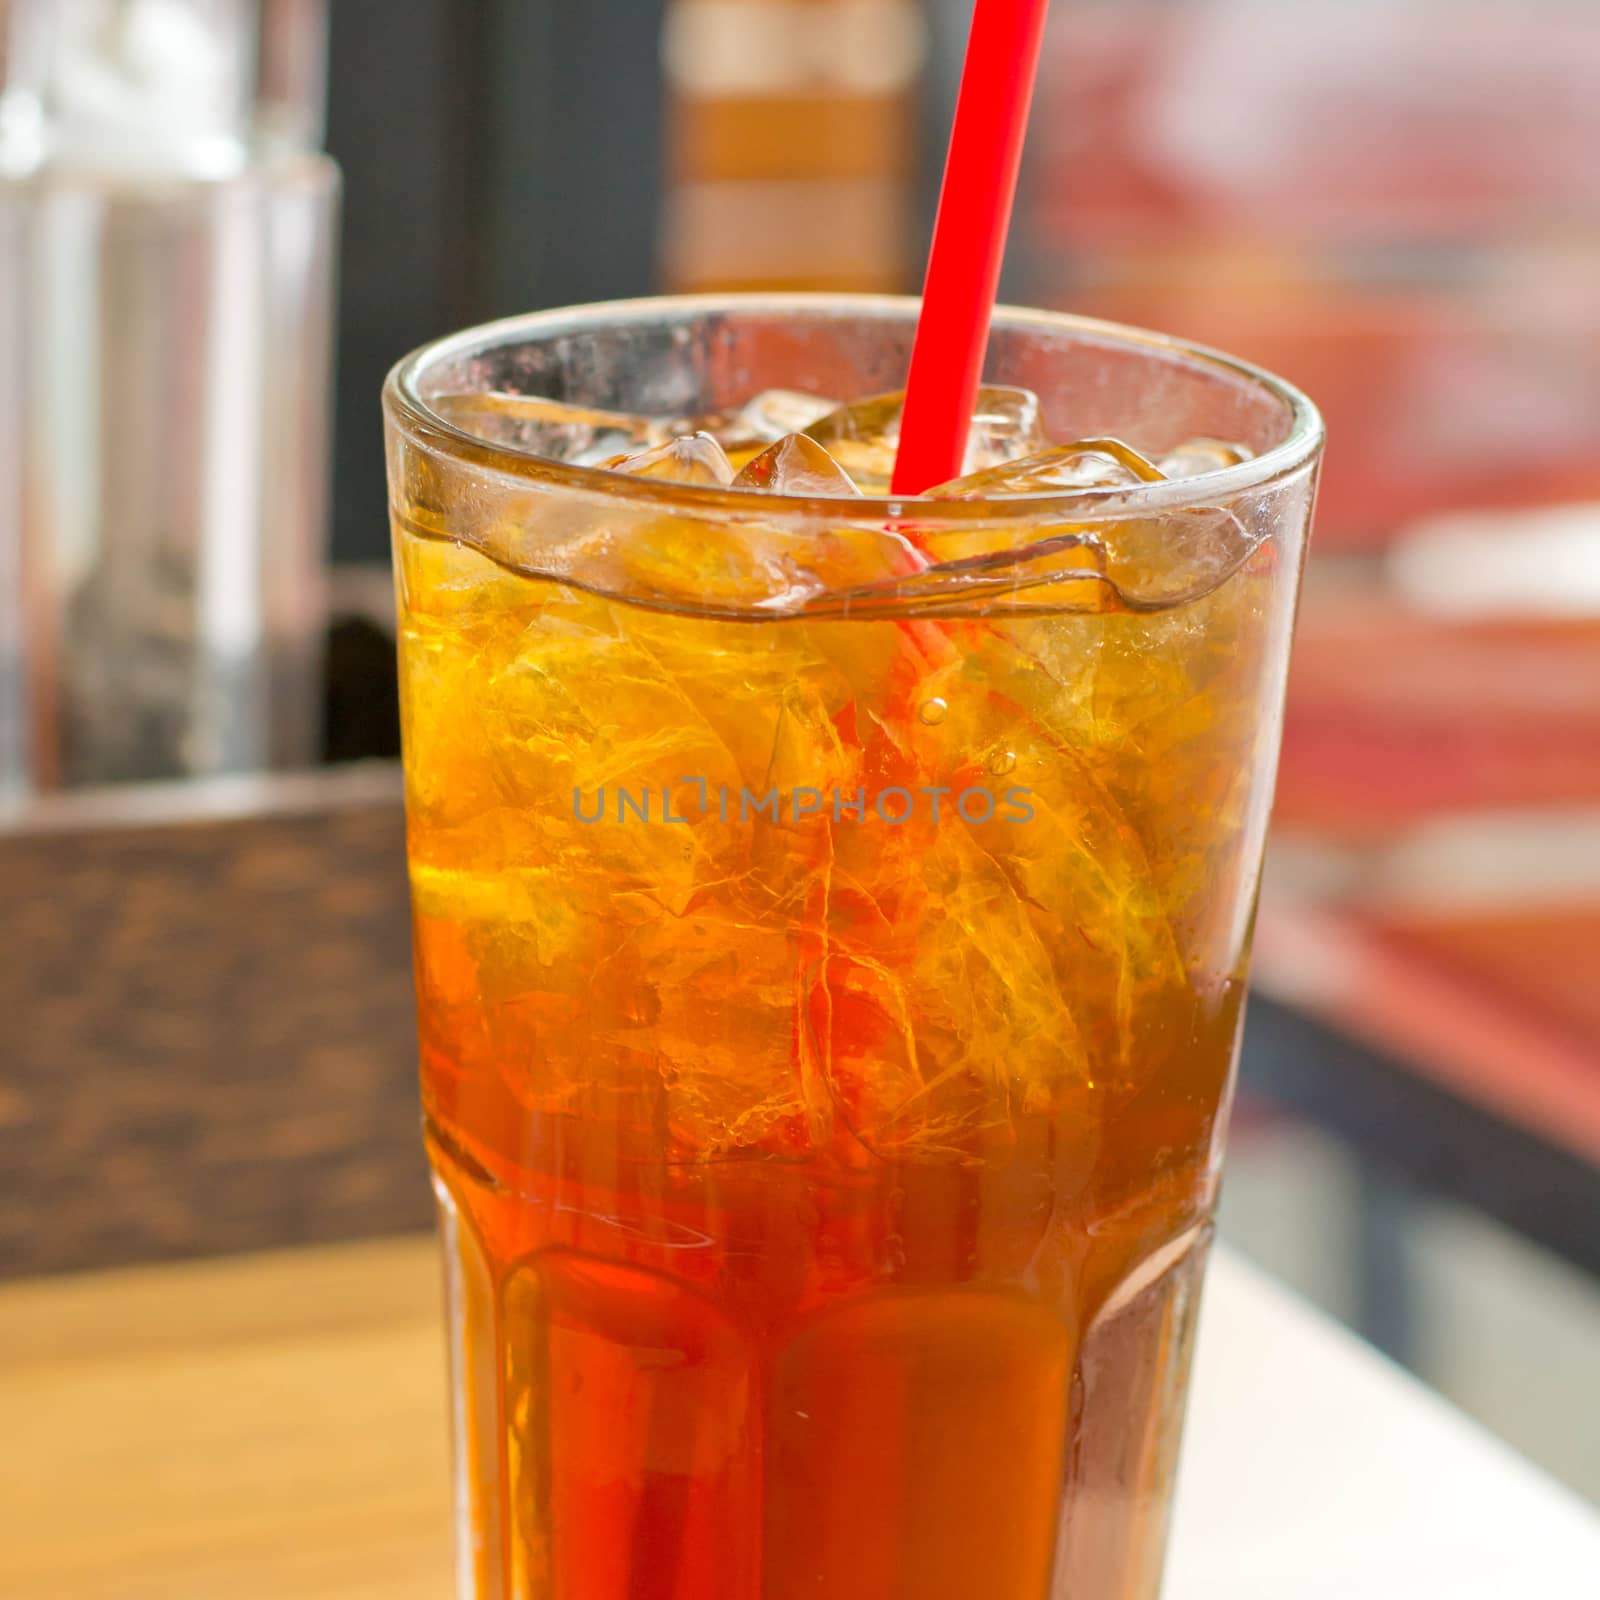 Lemon tea with ice in a glass by Thanamat